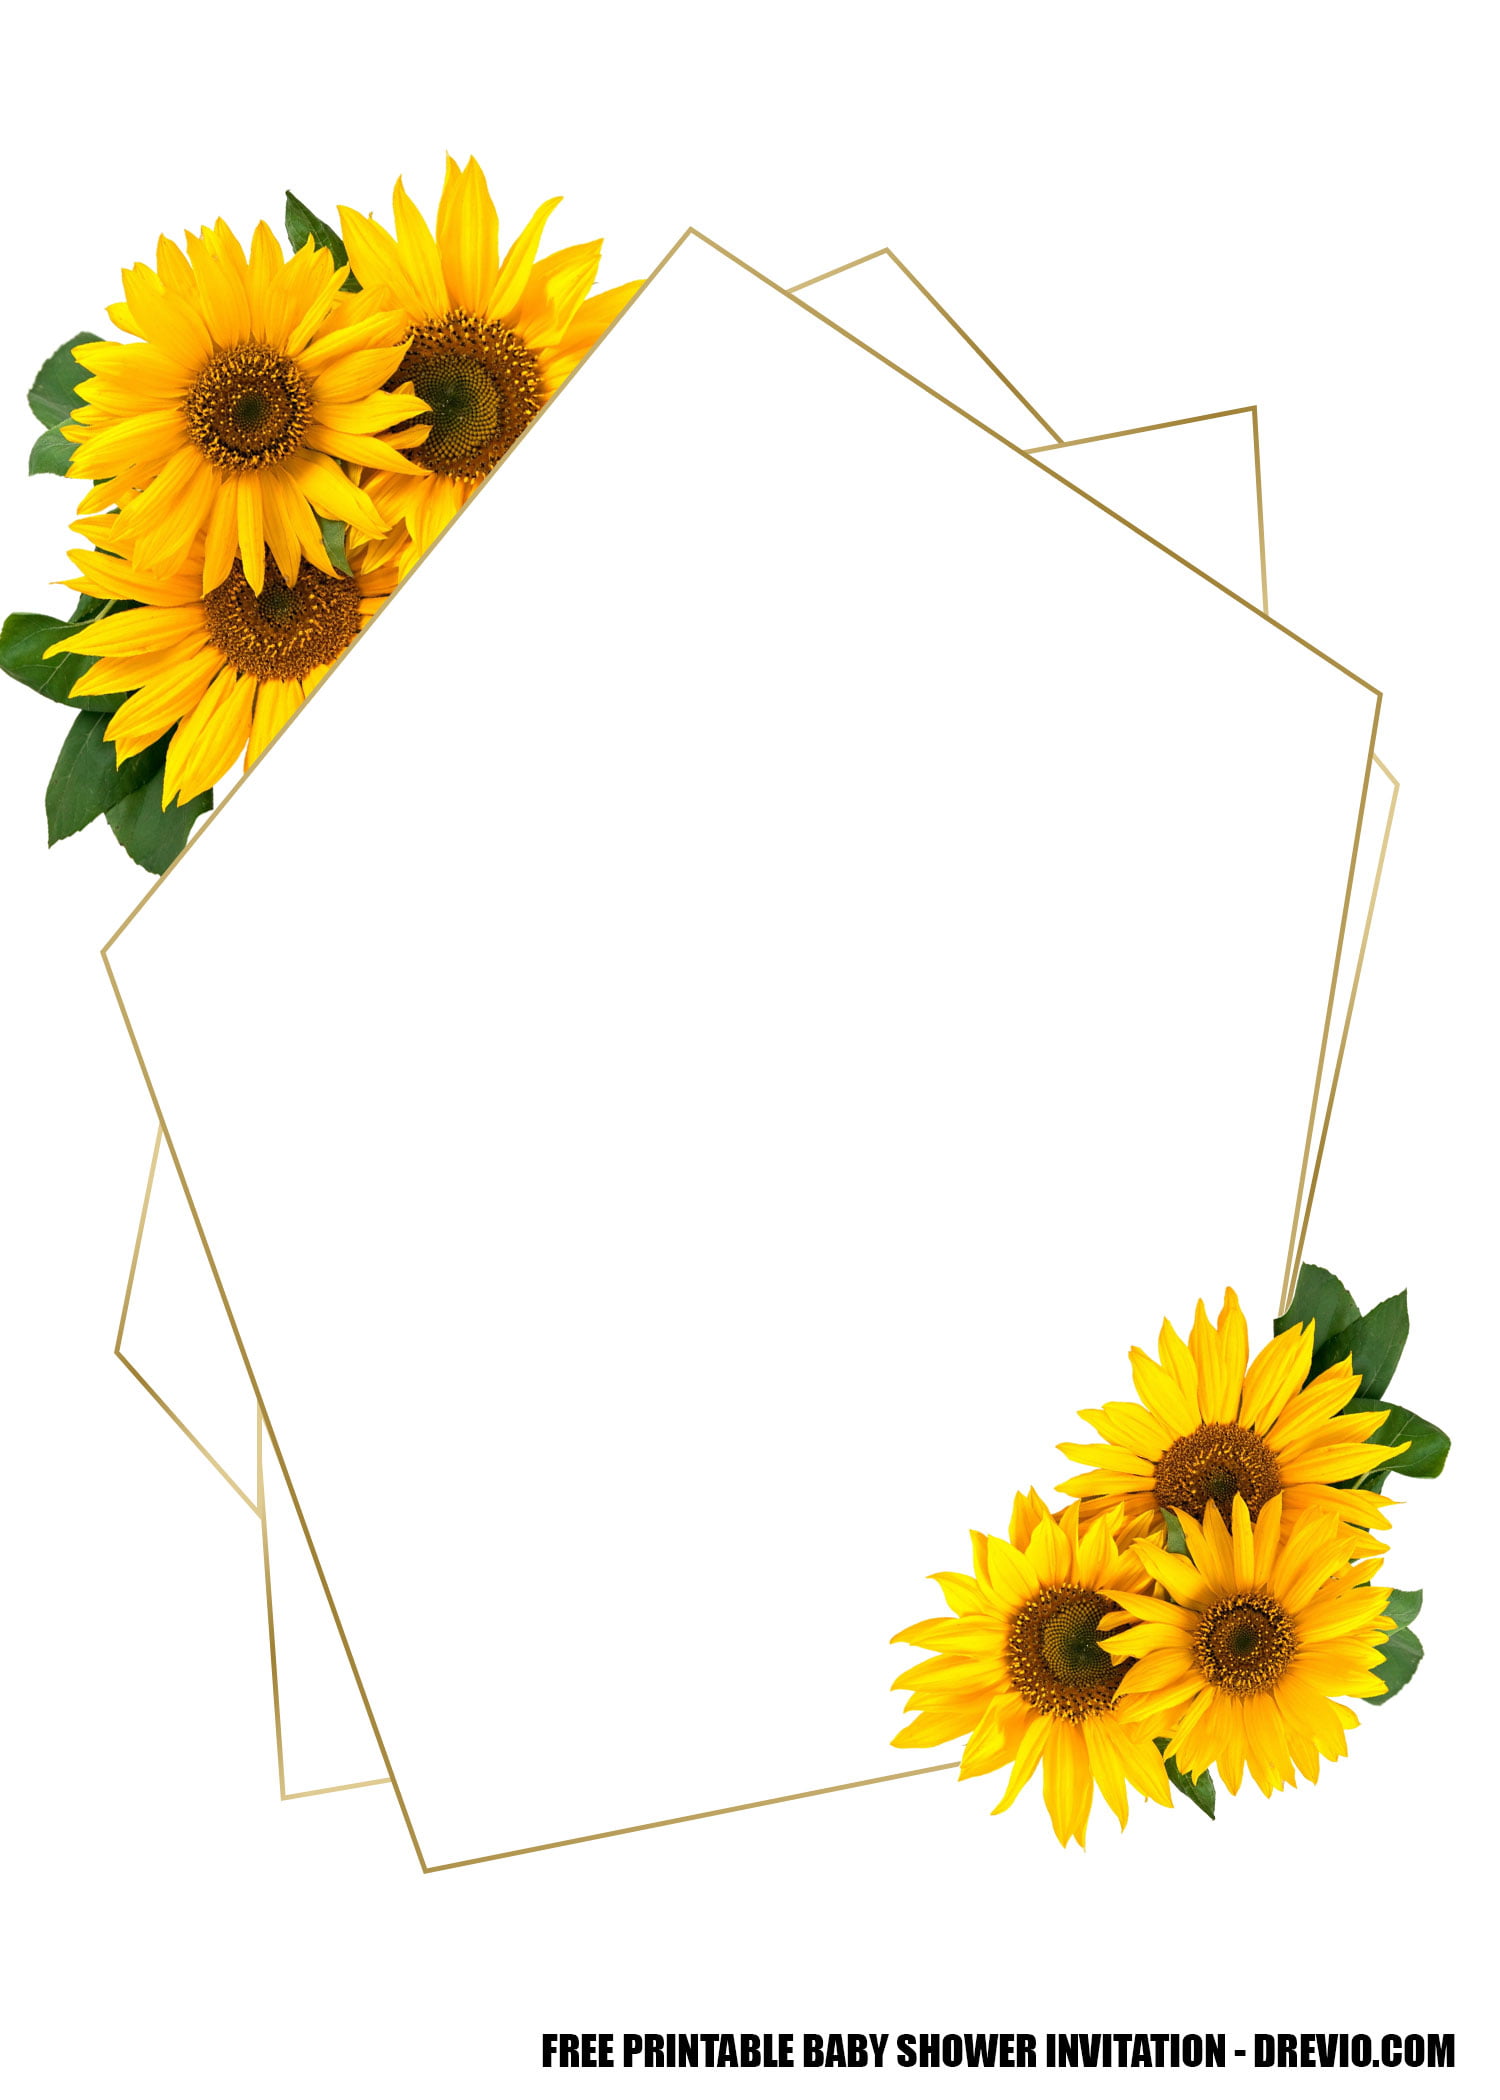 sunflower-template-to-print-choose-from-286-printable-design